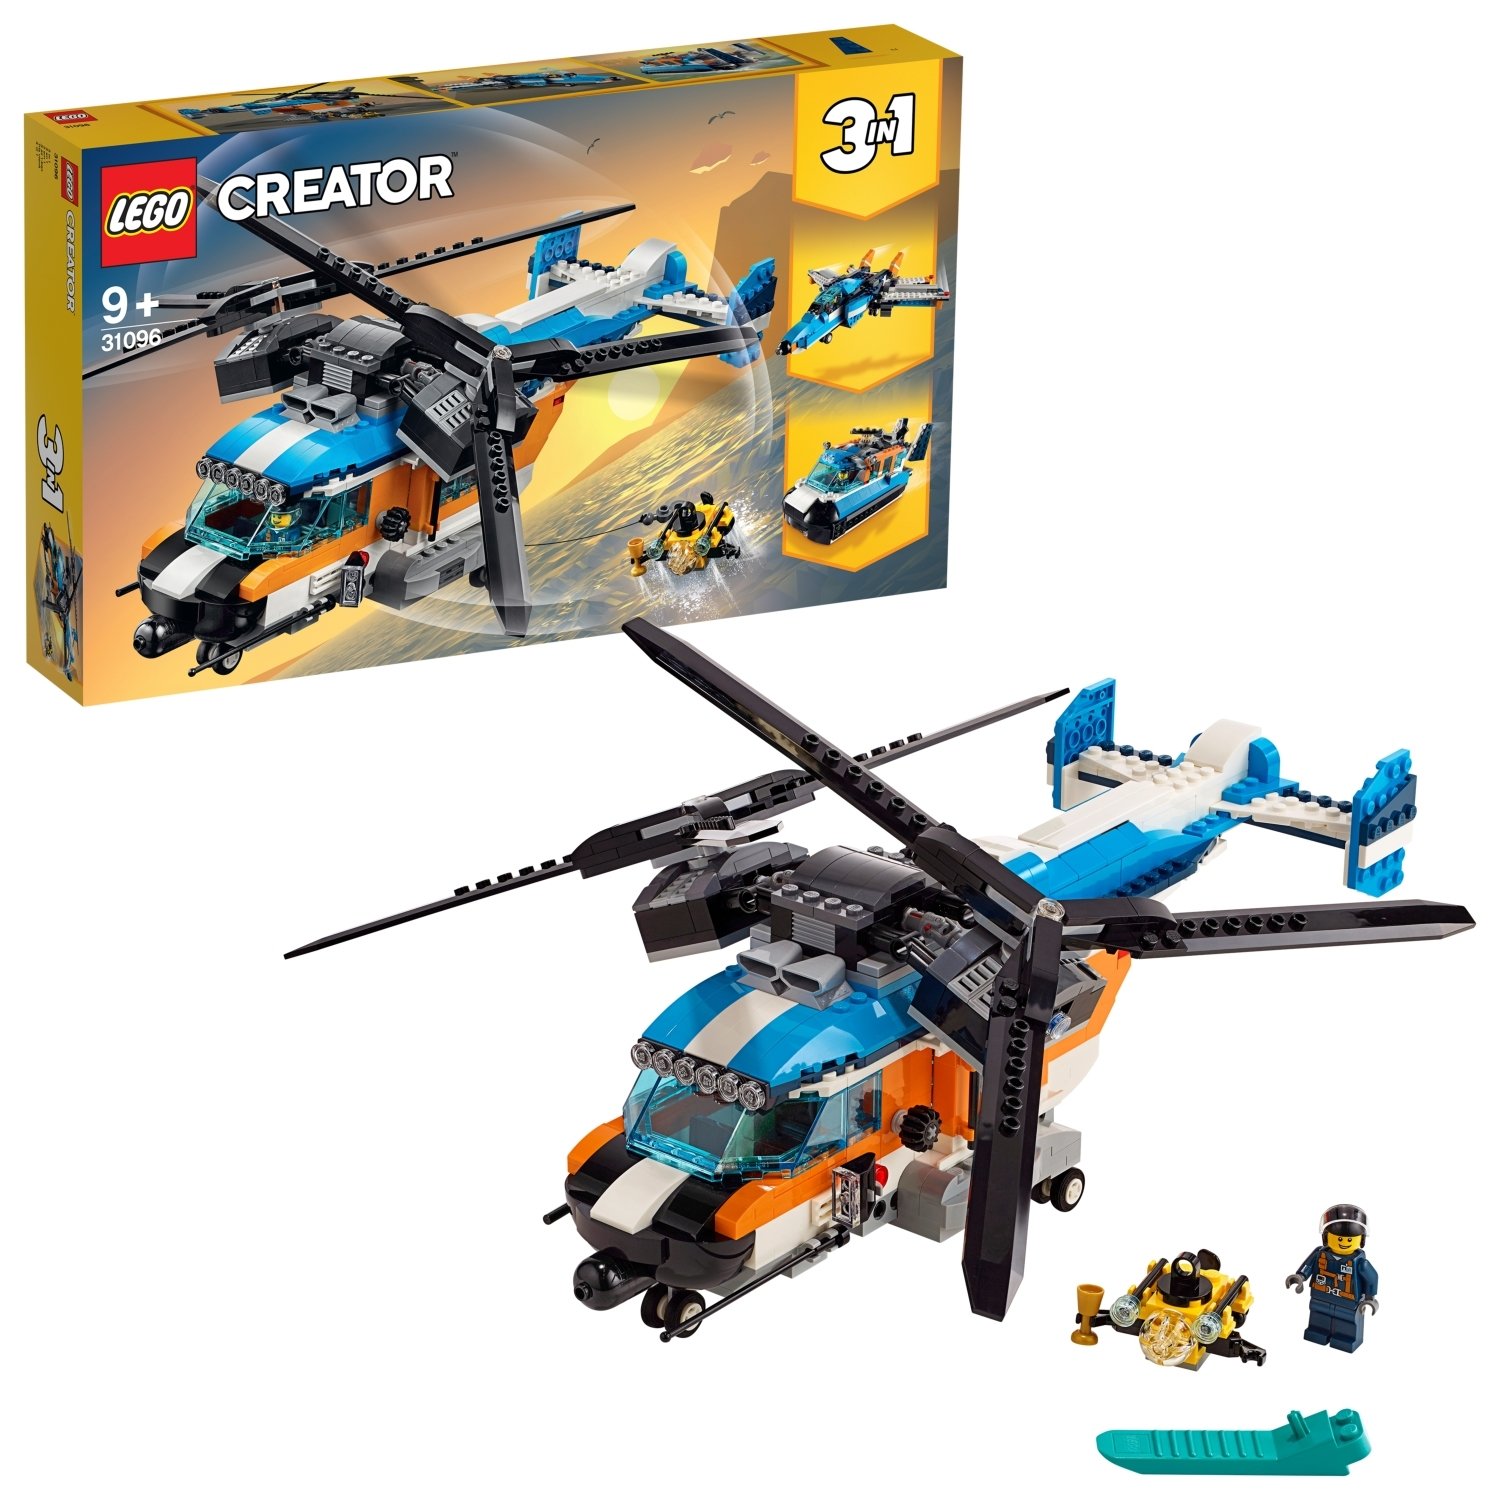 LEGO Creator Twin Rotor Helicopter - 31096